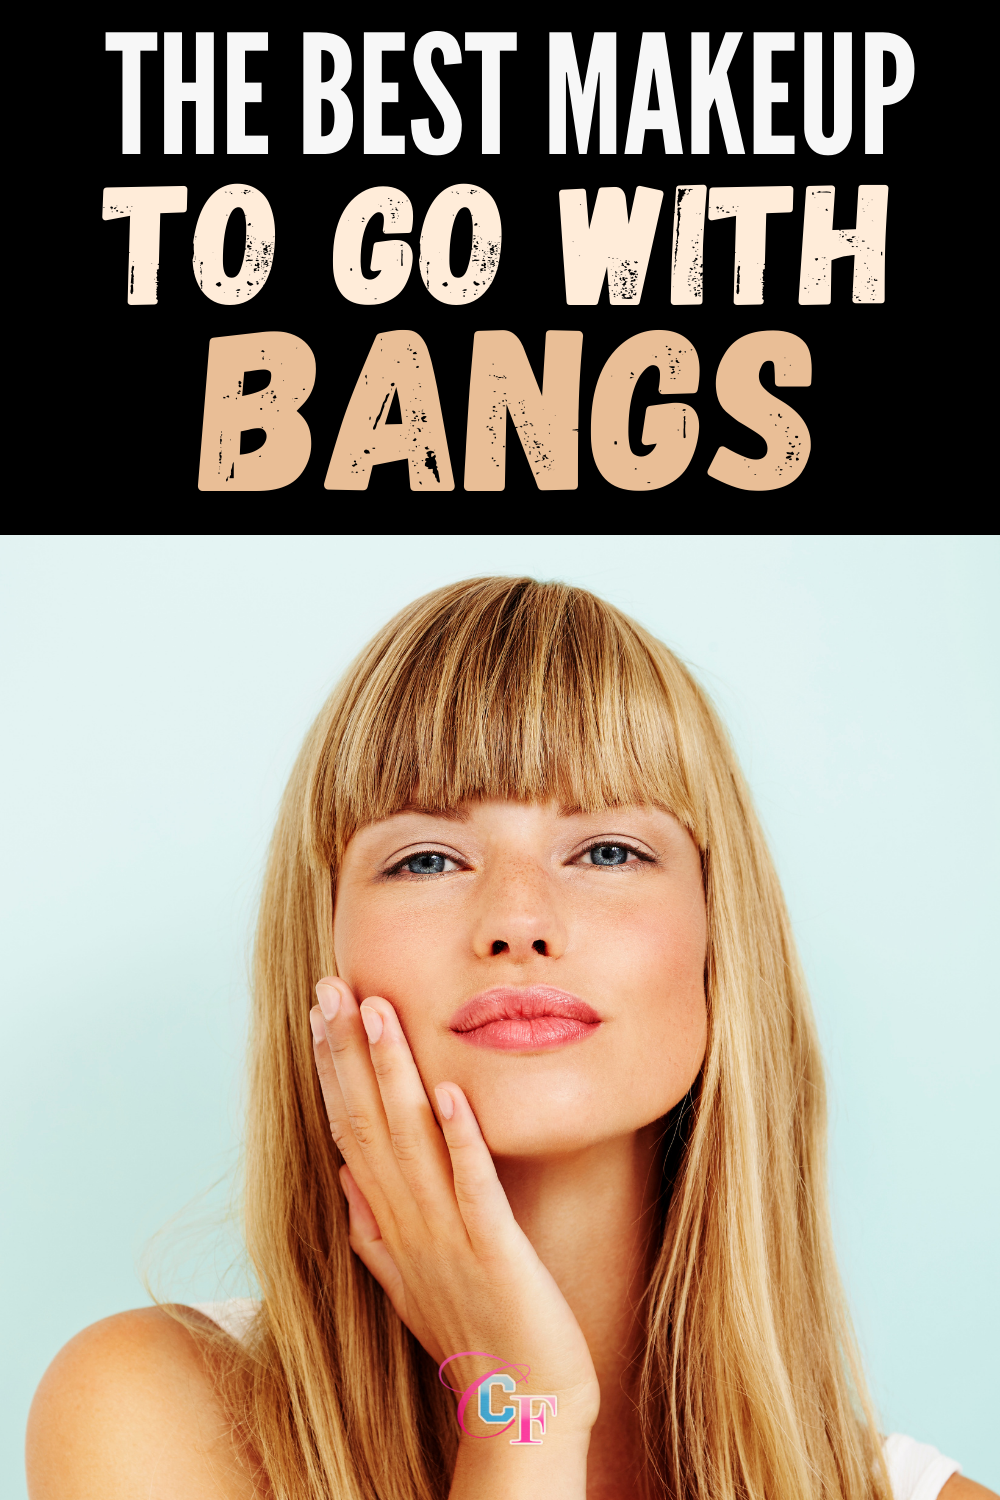 The Best Makeup To Go With Your Bangs